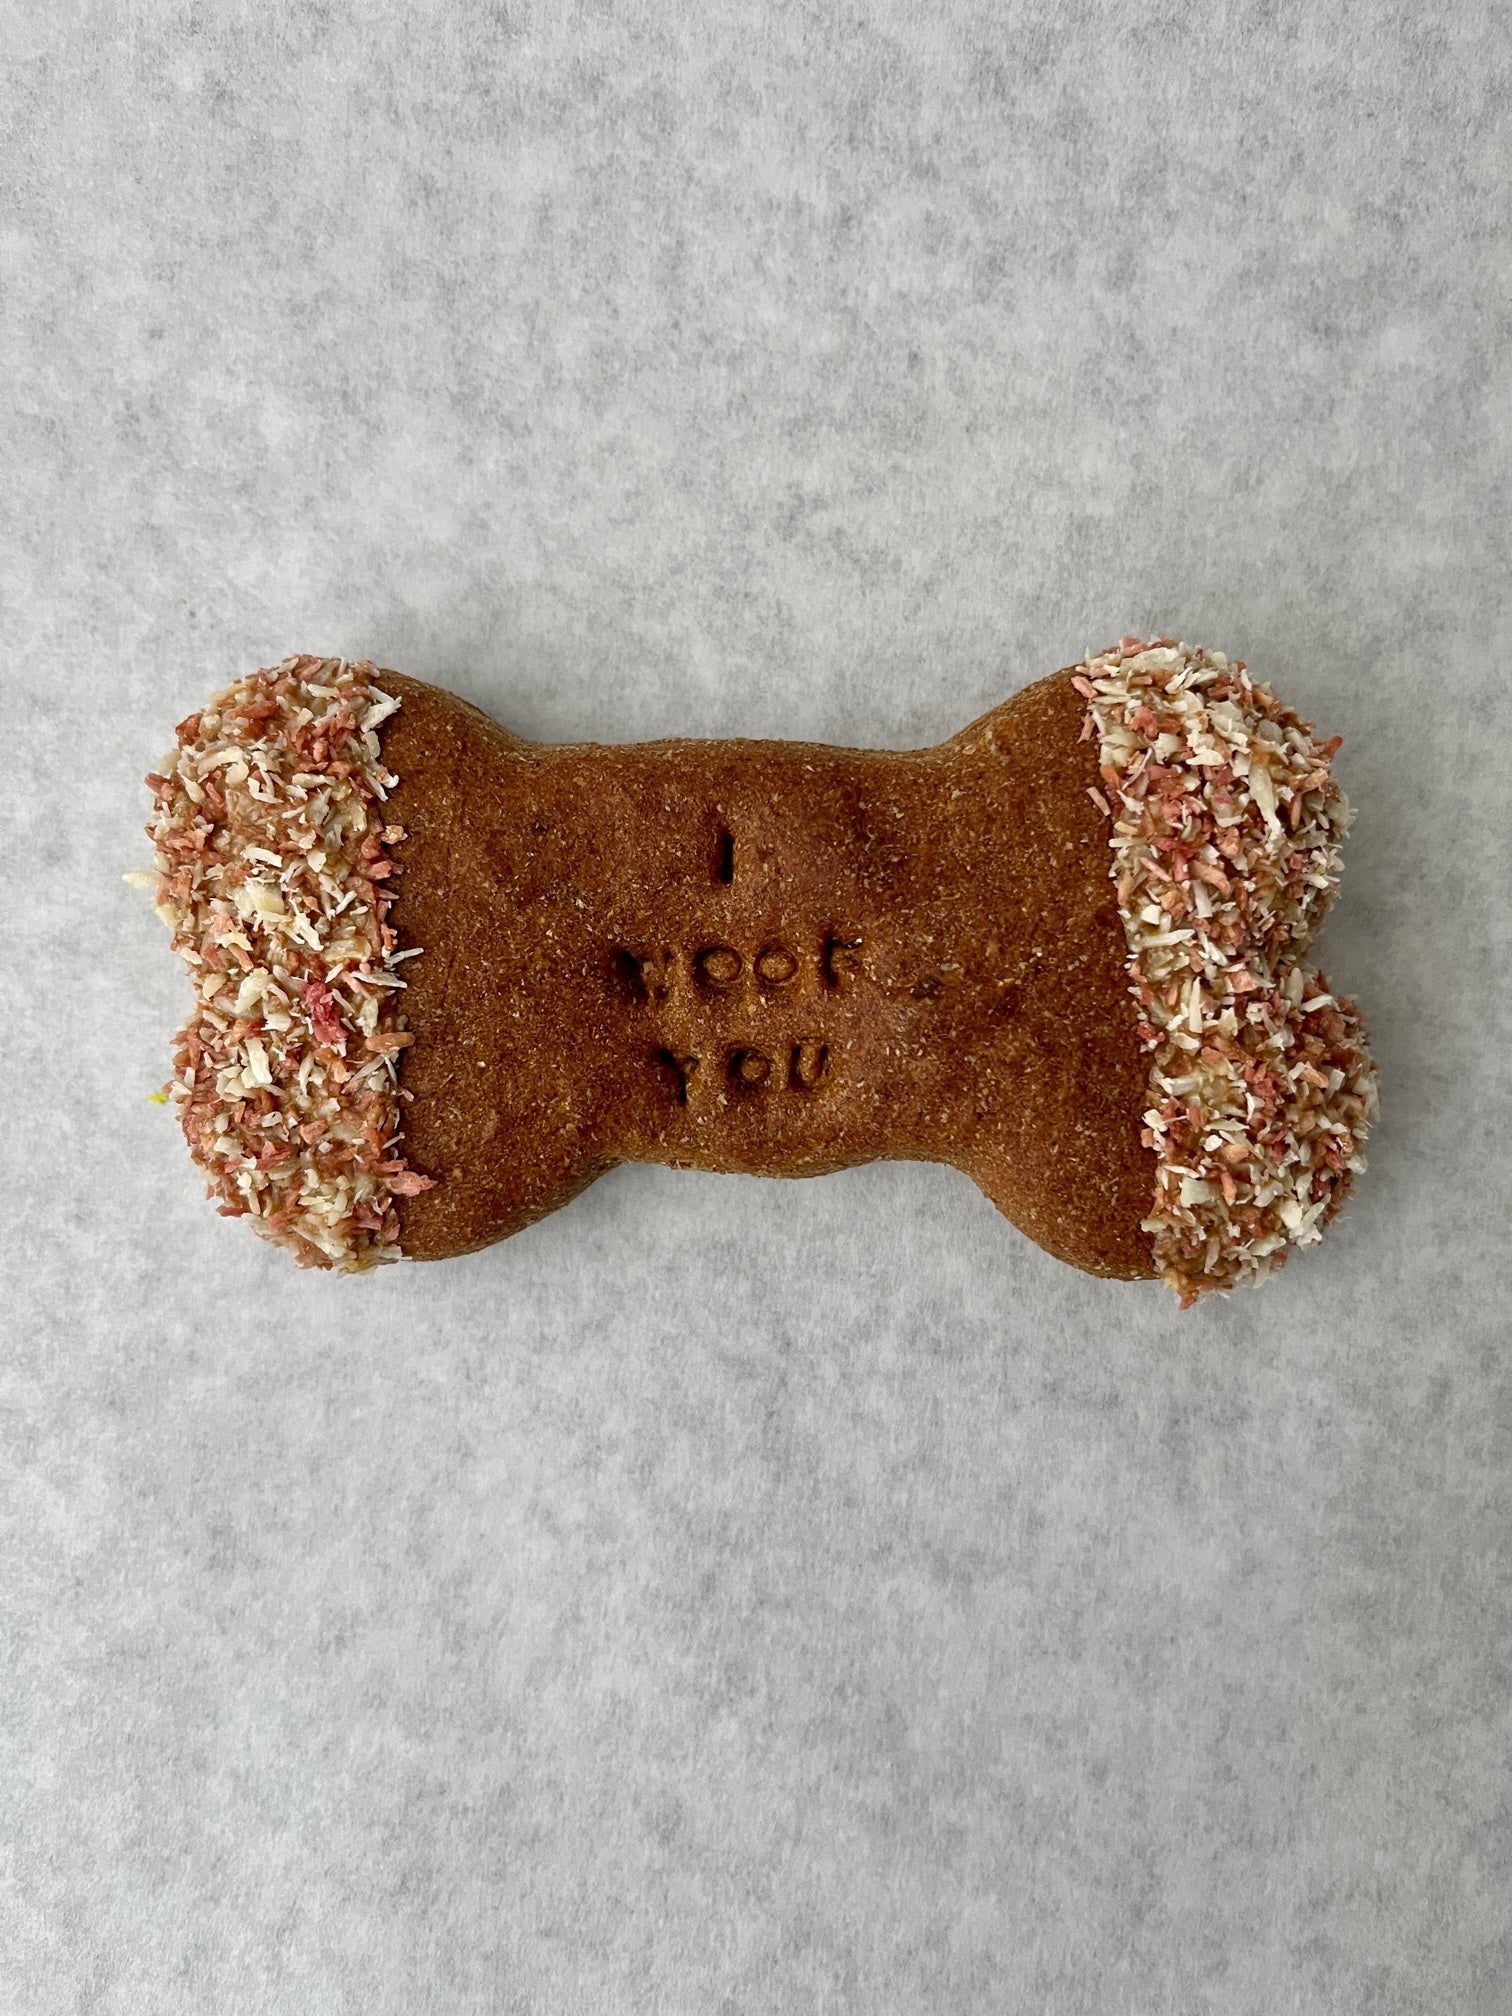 Celebration Dog Biscuits with Applesauce & Peanut Butter- I Woof You